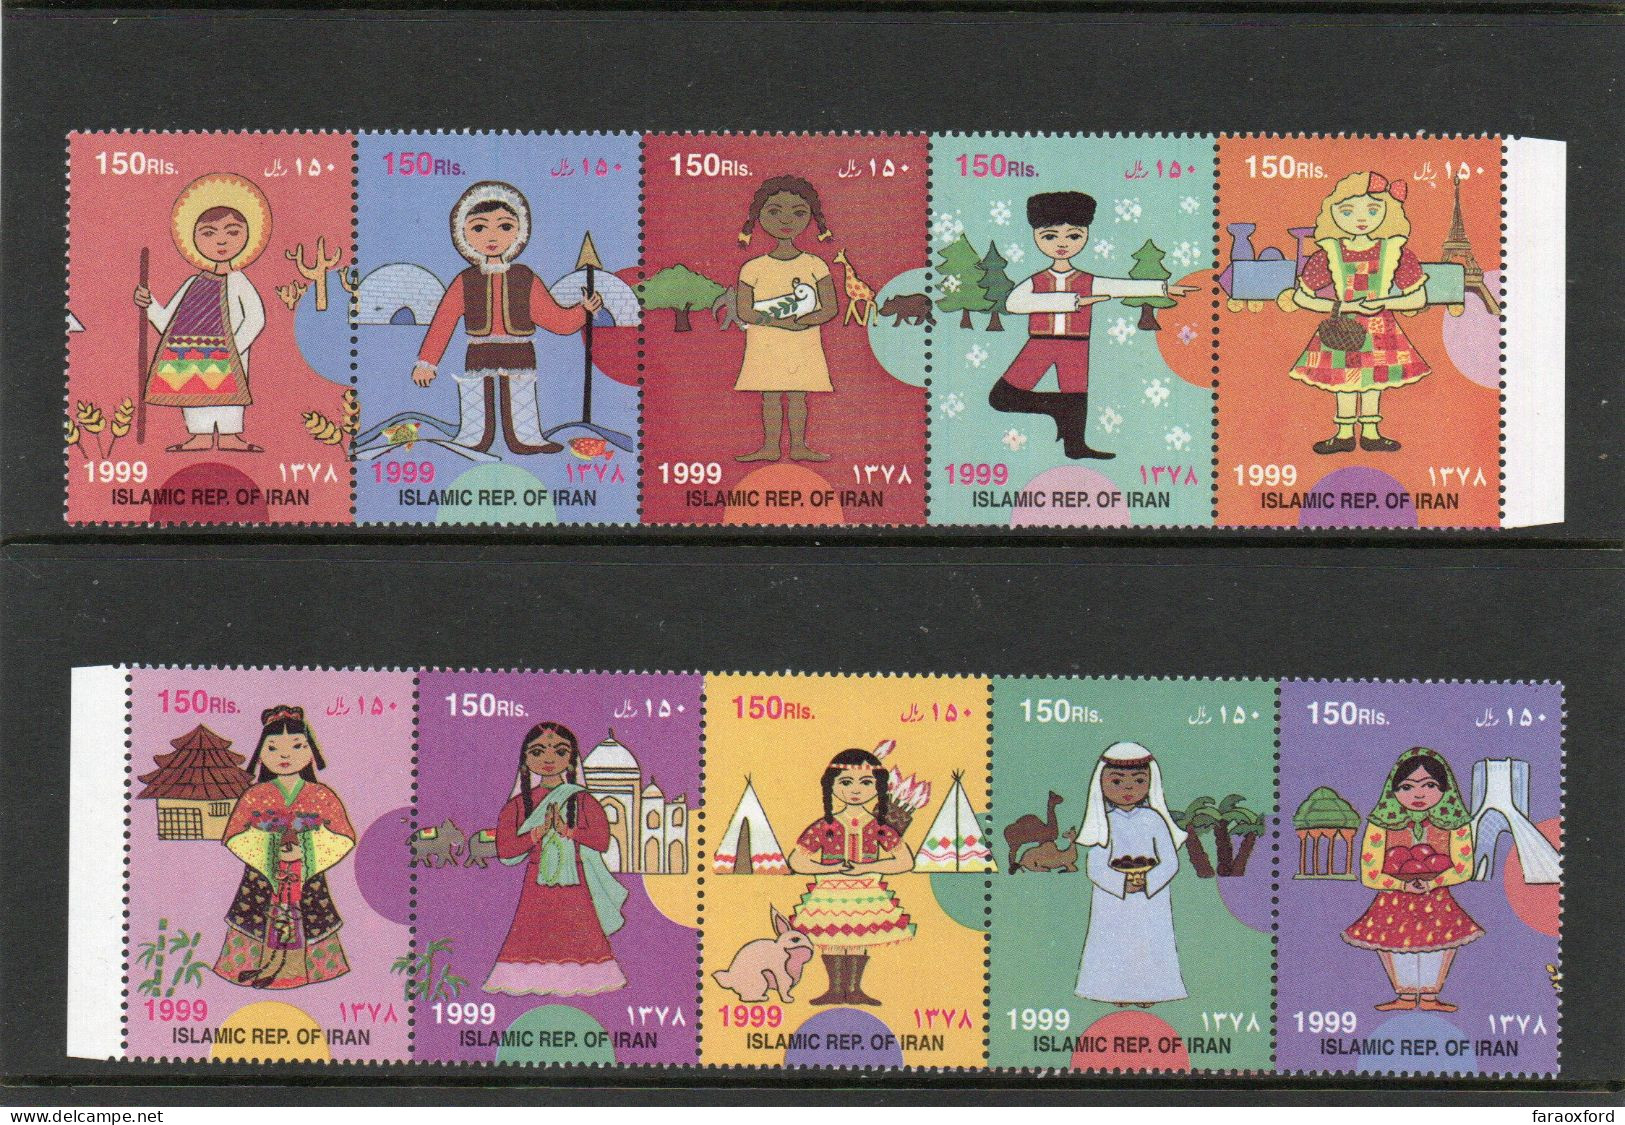 IRAN - ايران - PERSIA - 1999 - CHILDREN'S DAY - COMPLETE SET OF STAMPS - MINT NOT HINGED - Iran